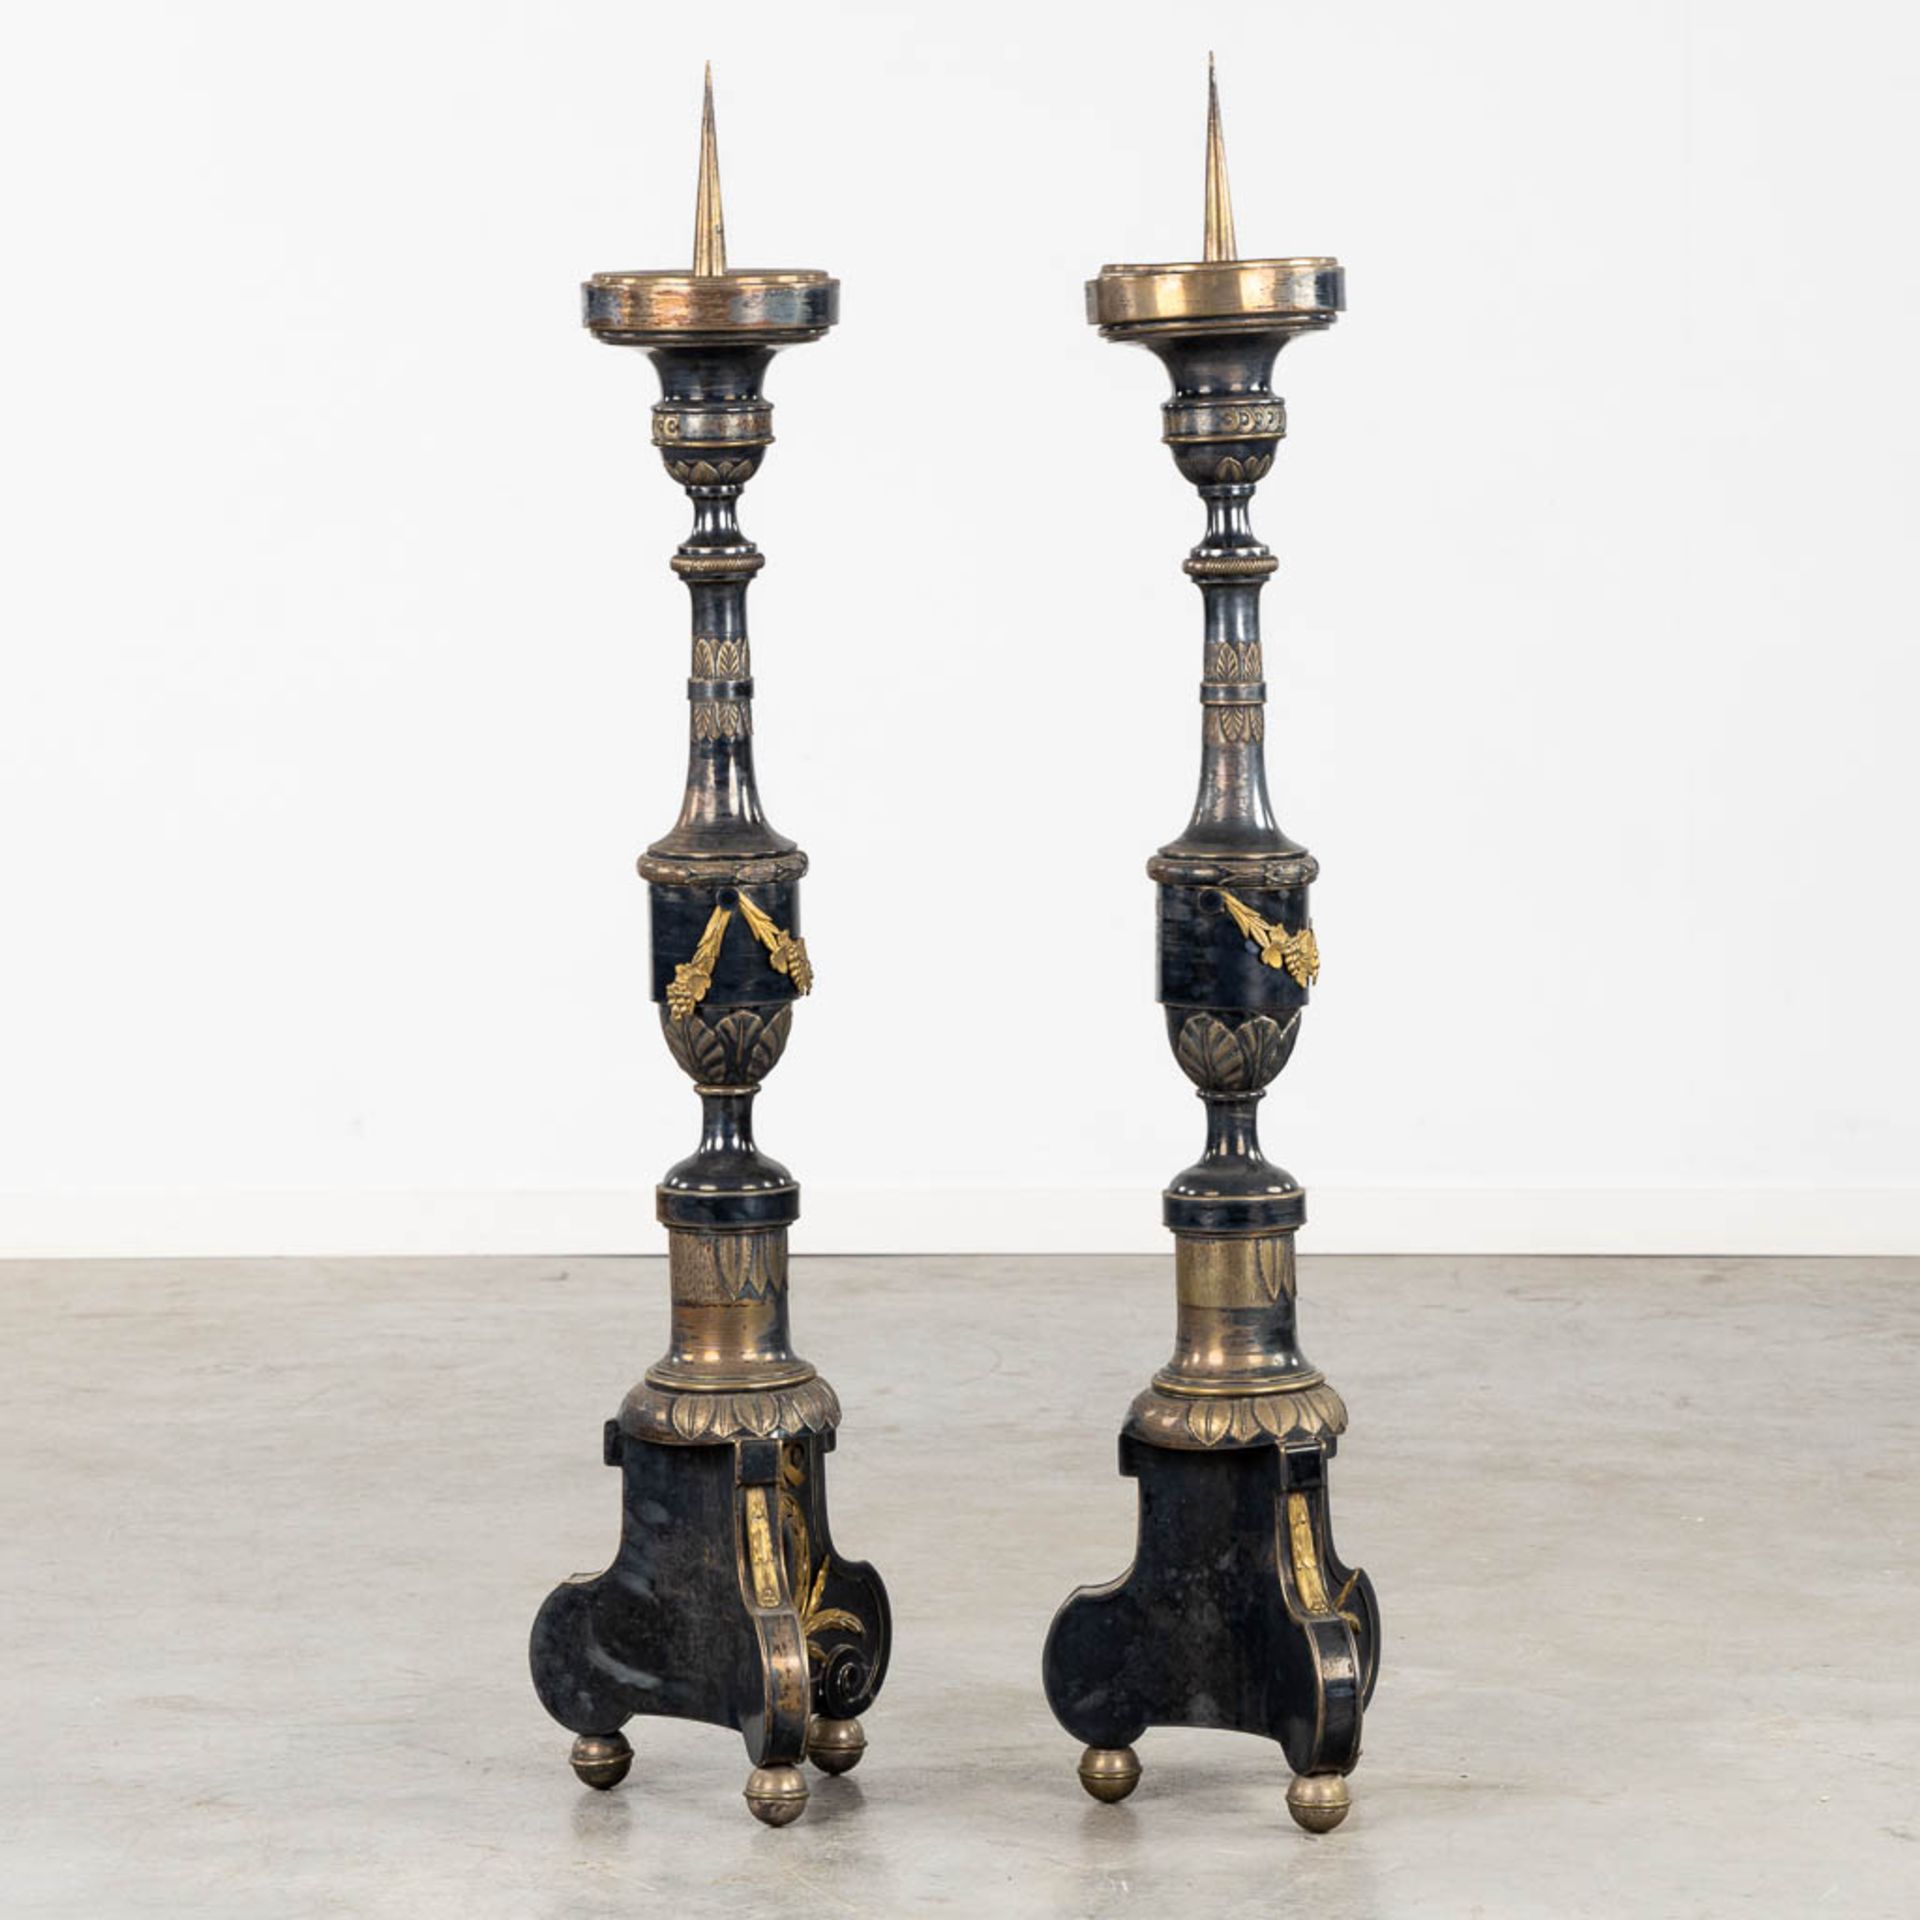 A pair of Church Candlesticks, silver- and gold-plated metal. 19th C. (H:120 cm) - Image 3 of 9